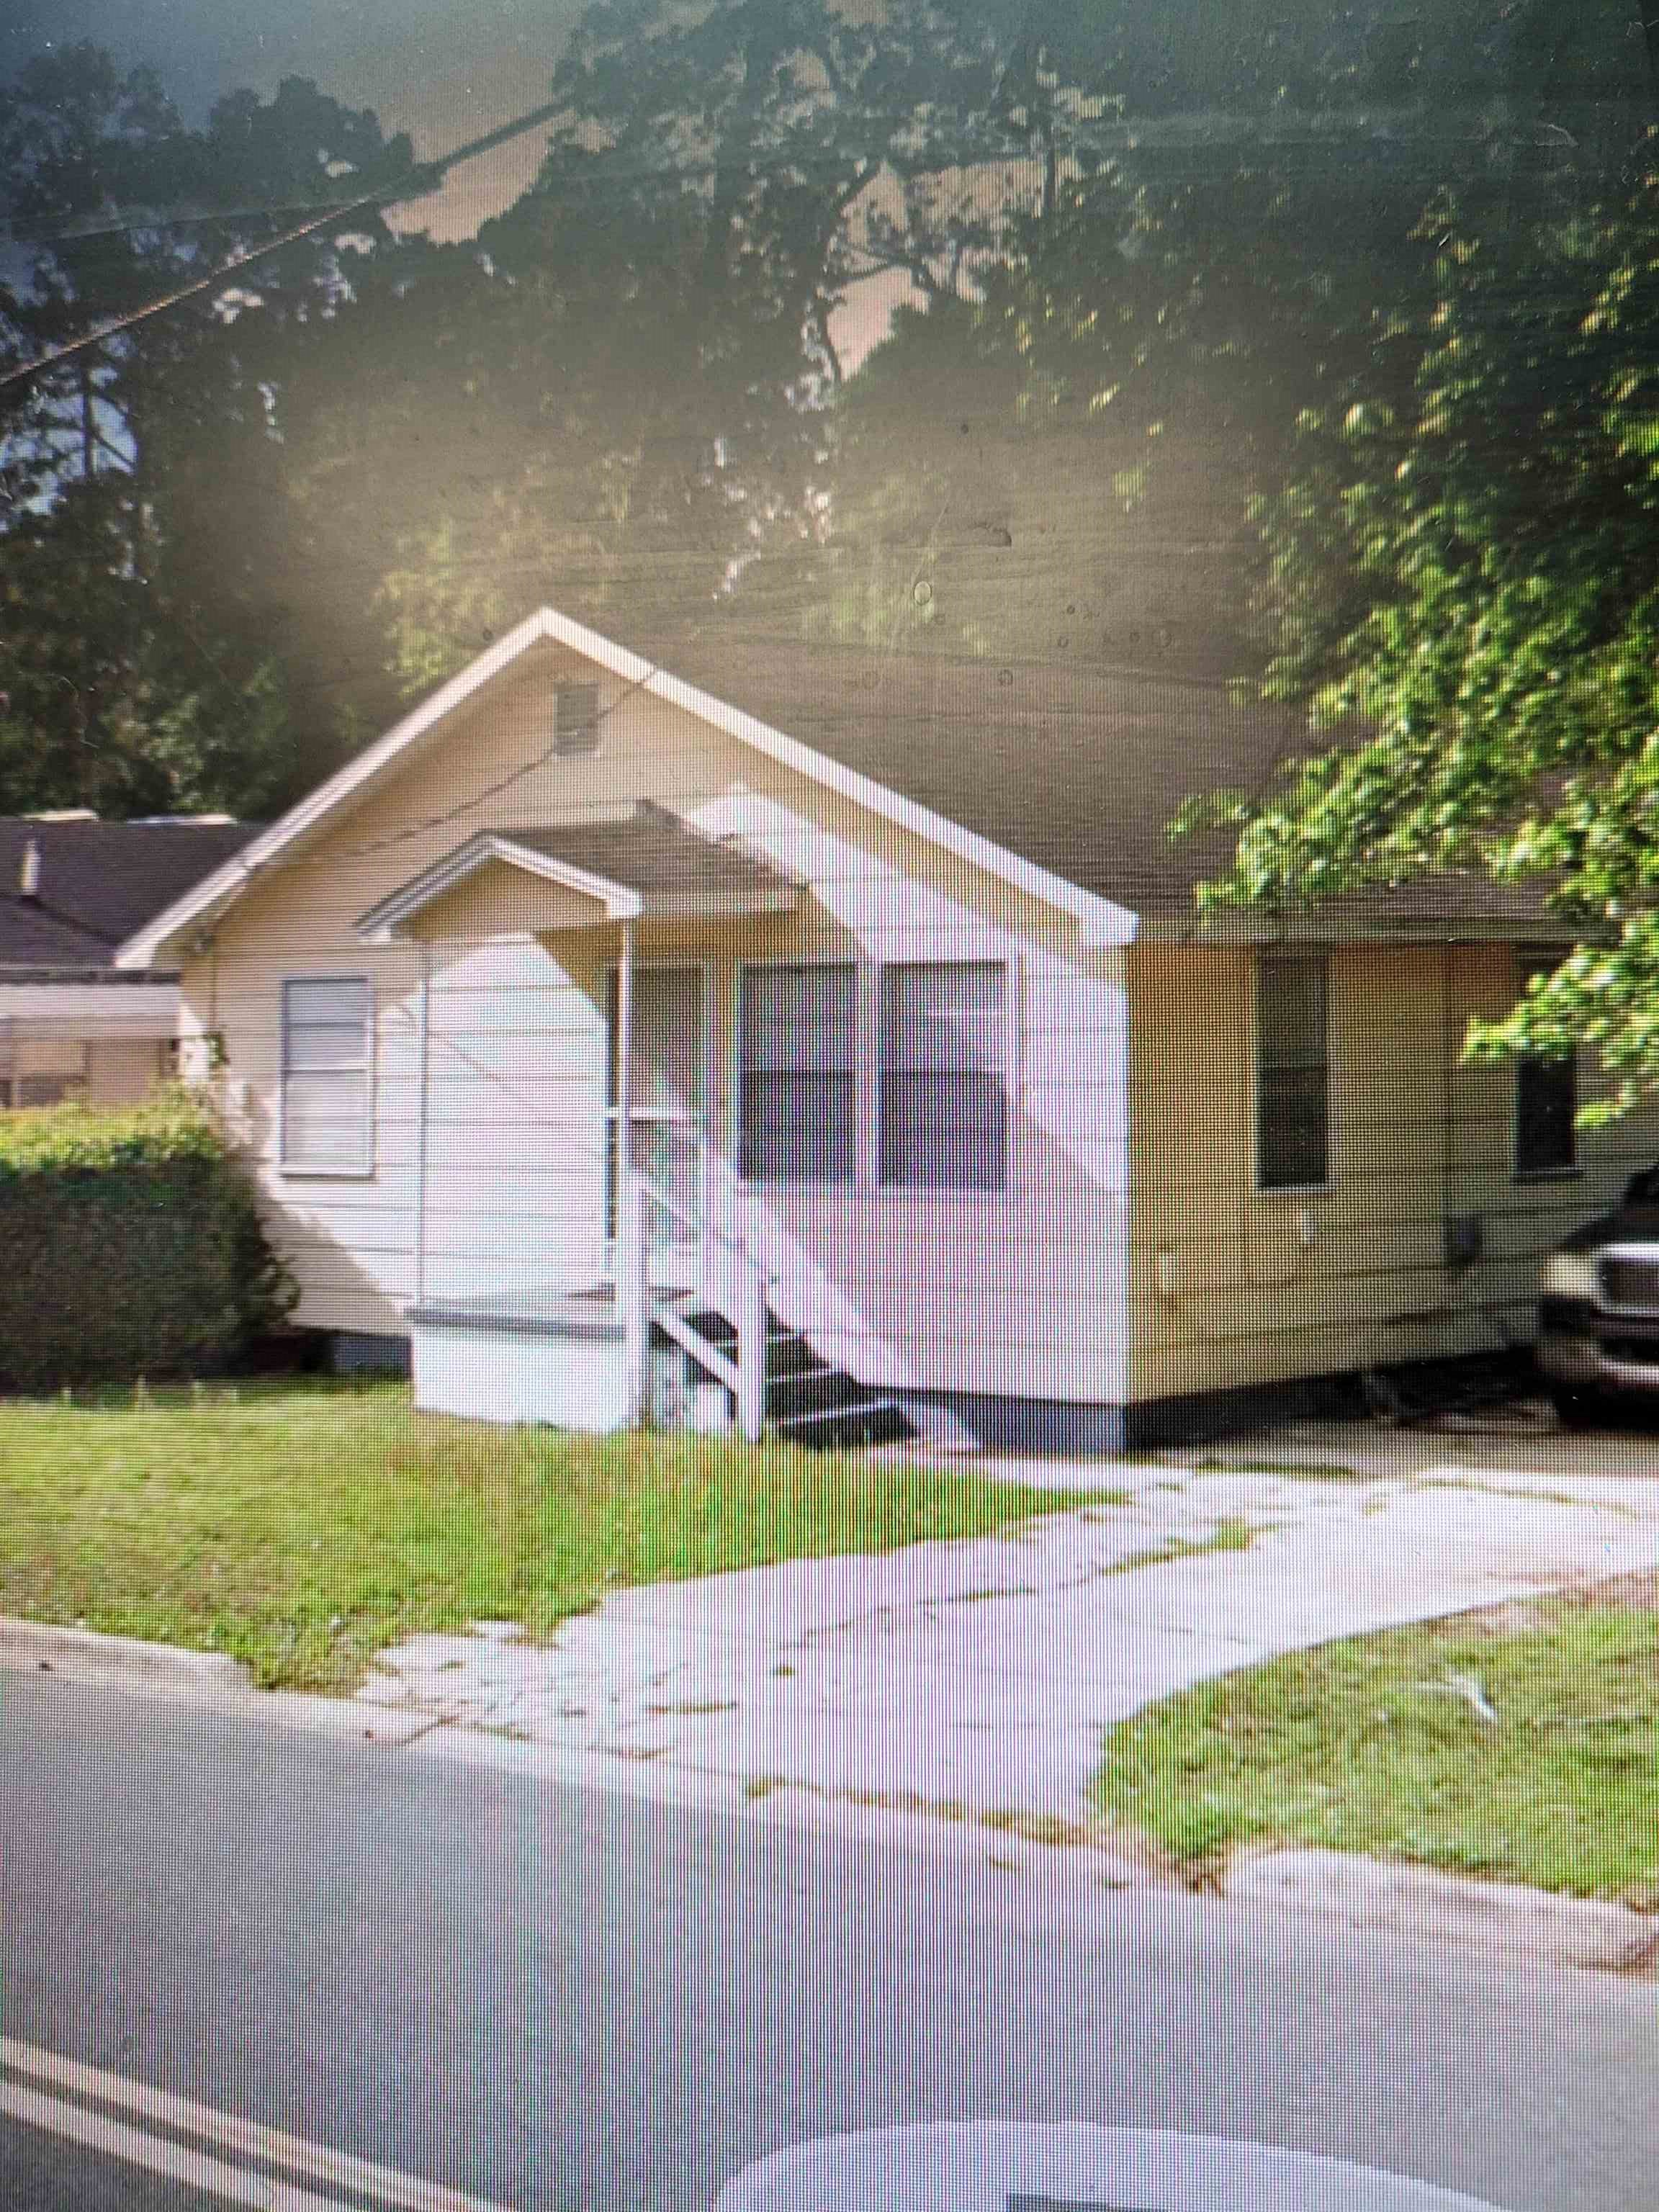 534 W 4th Avenue,TALLAHASSEE,Florida 32303,3 Bedrooms Bedrooms,1 BathroomBathrooms,Detached single family,534 W 4th Avenue,369222